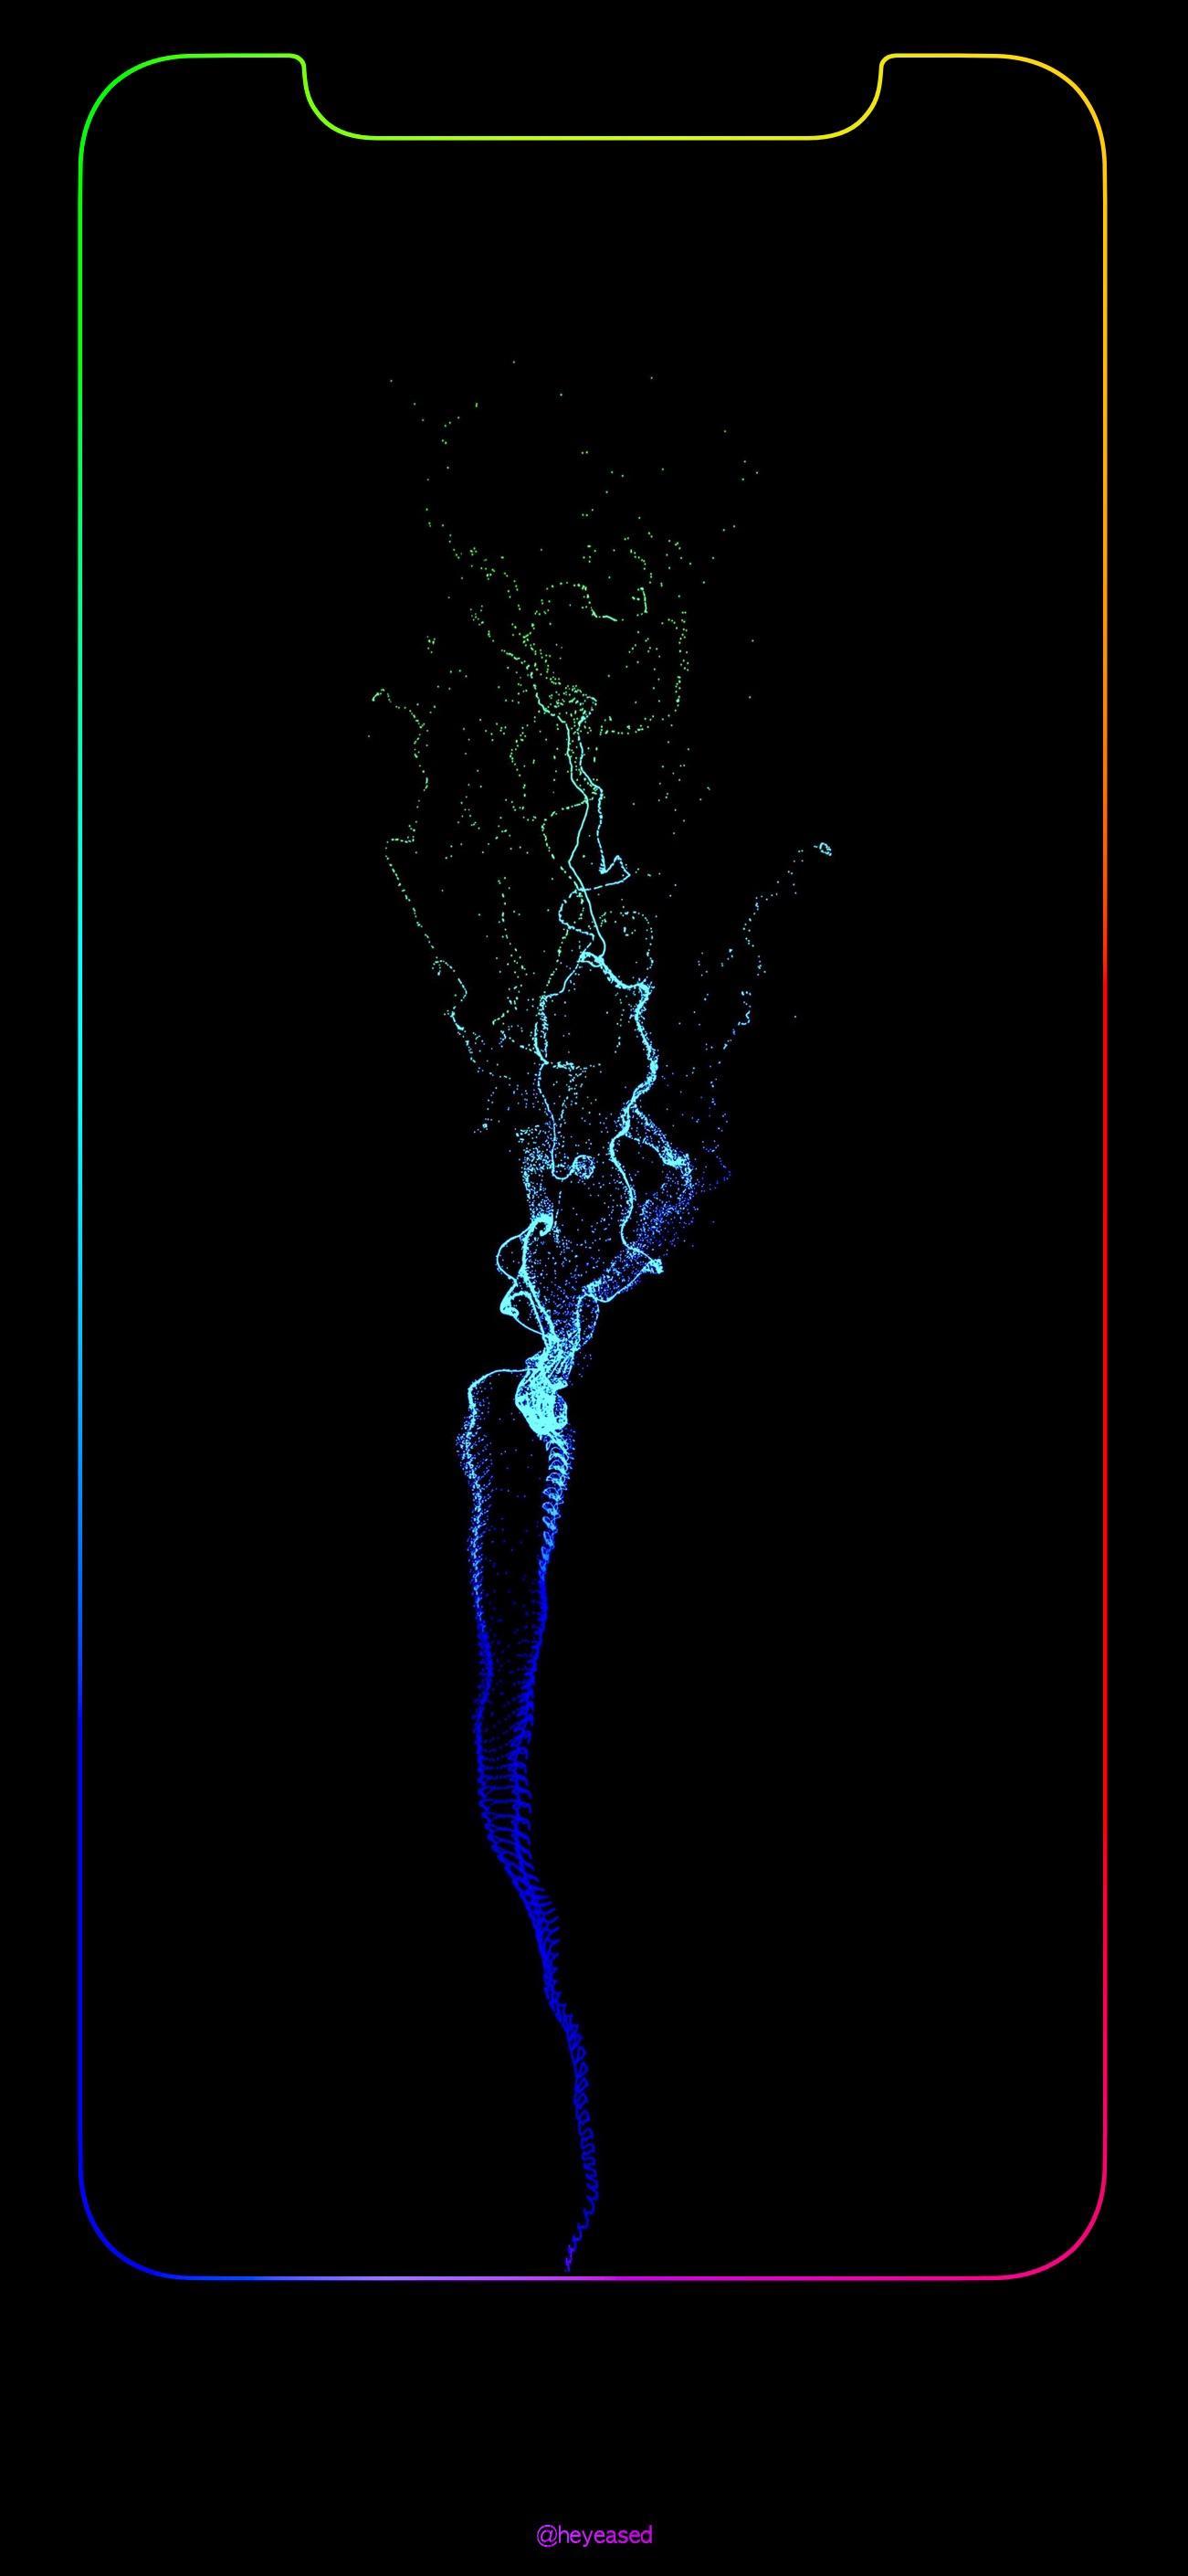 iPhone X Outline Wallpaper Free iPhone X Outline Background